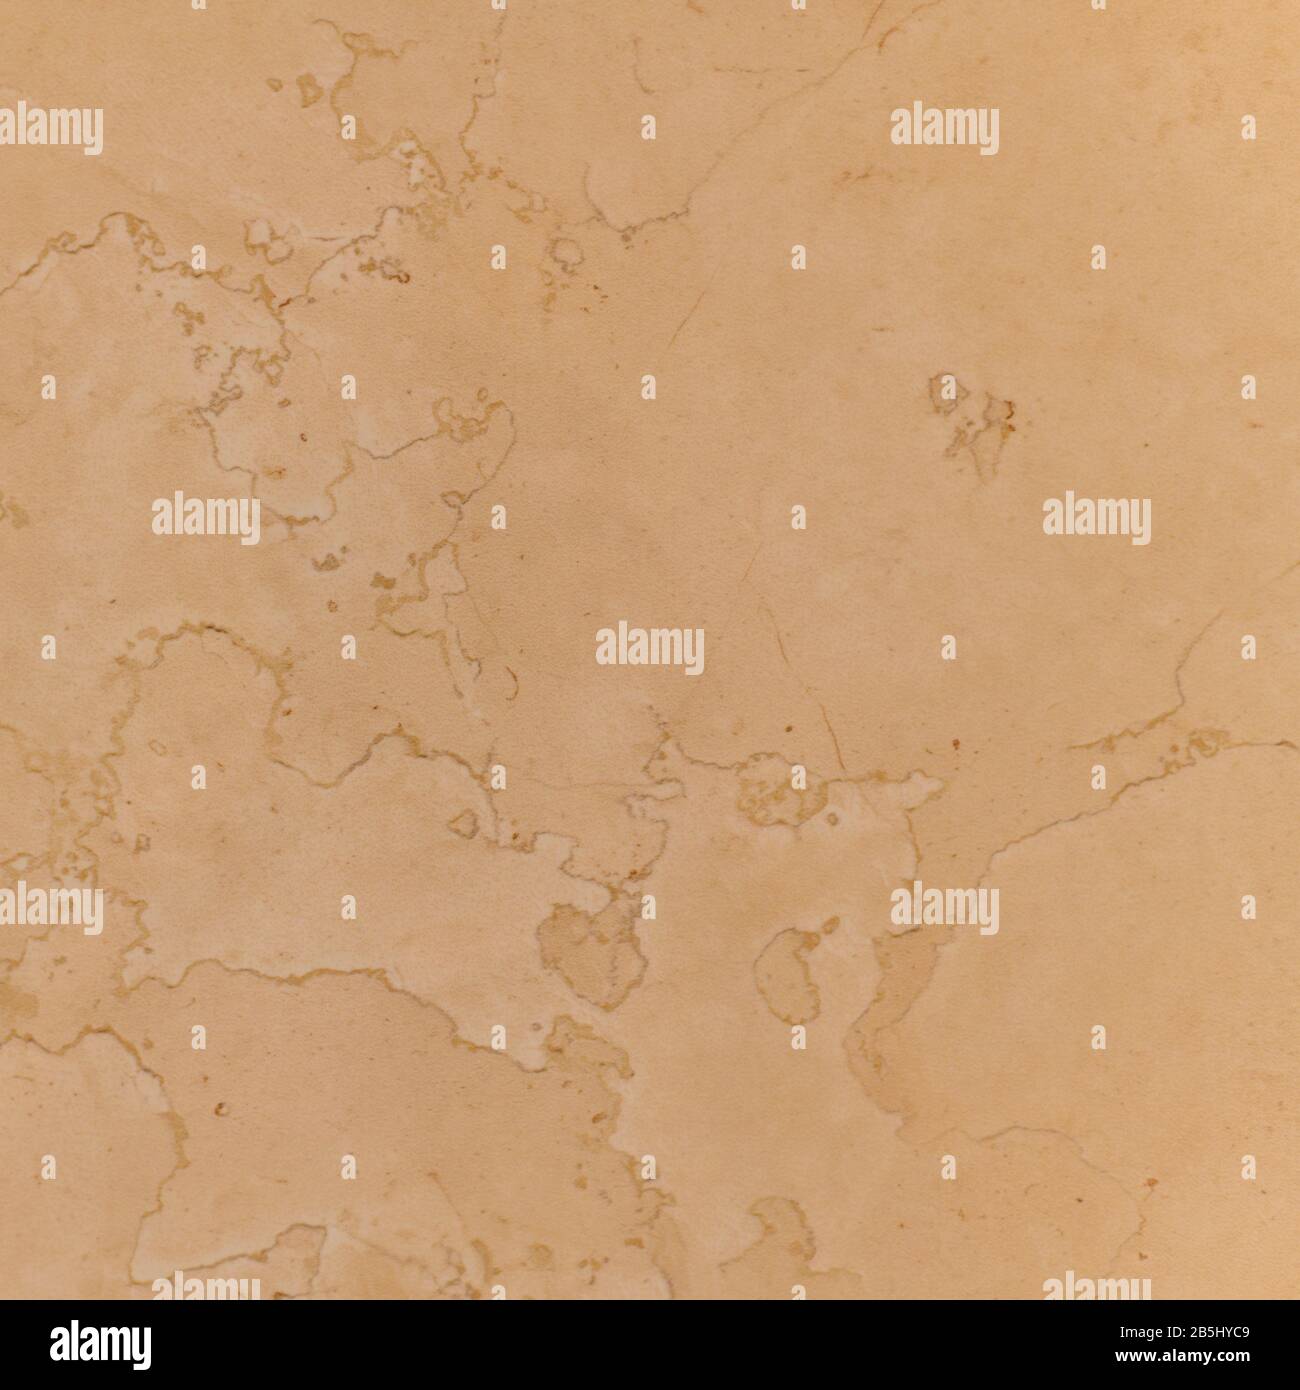 The picture is light brown marble, similar to the contours of the seas on a physical map.  Stock Photo